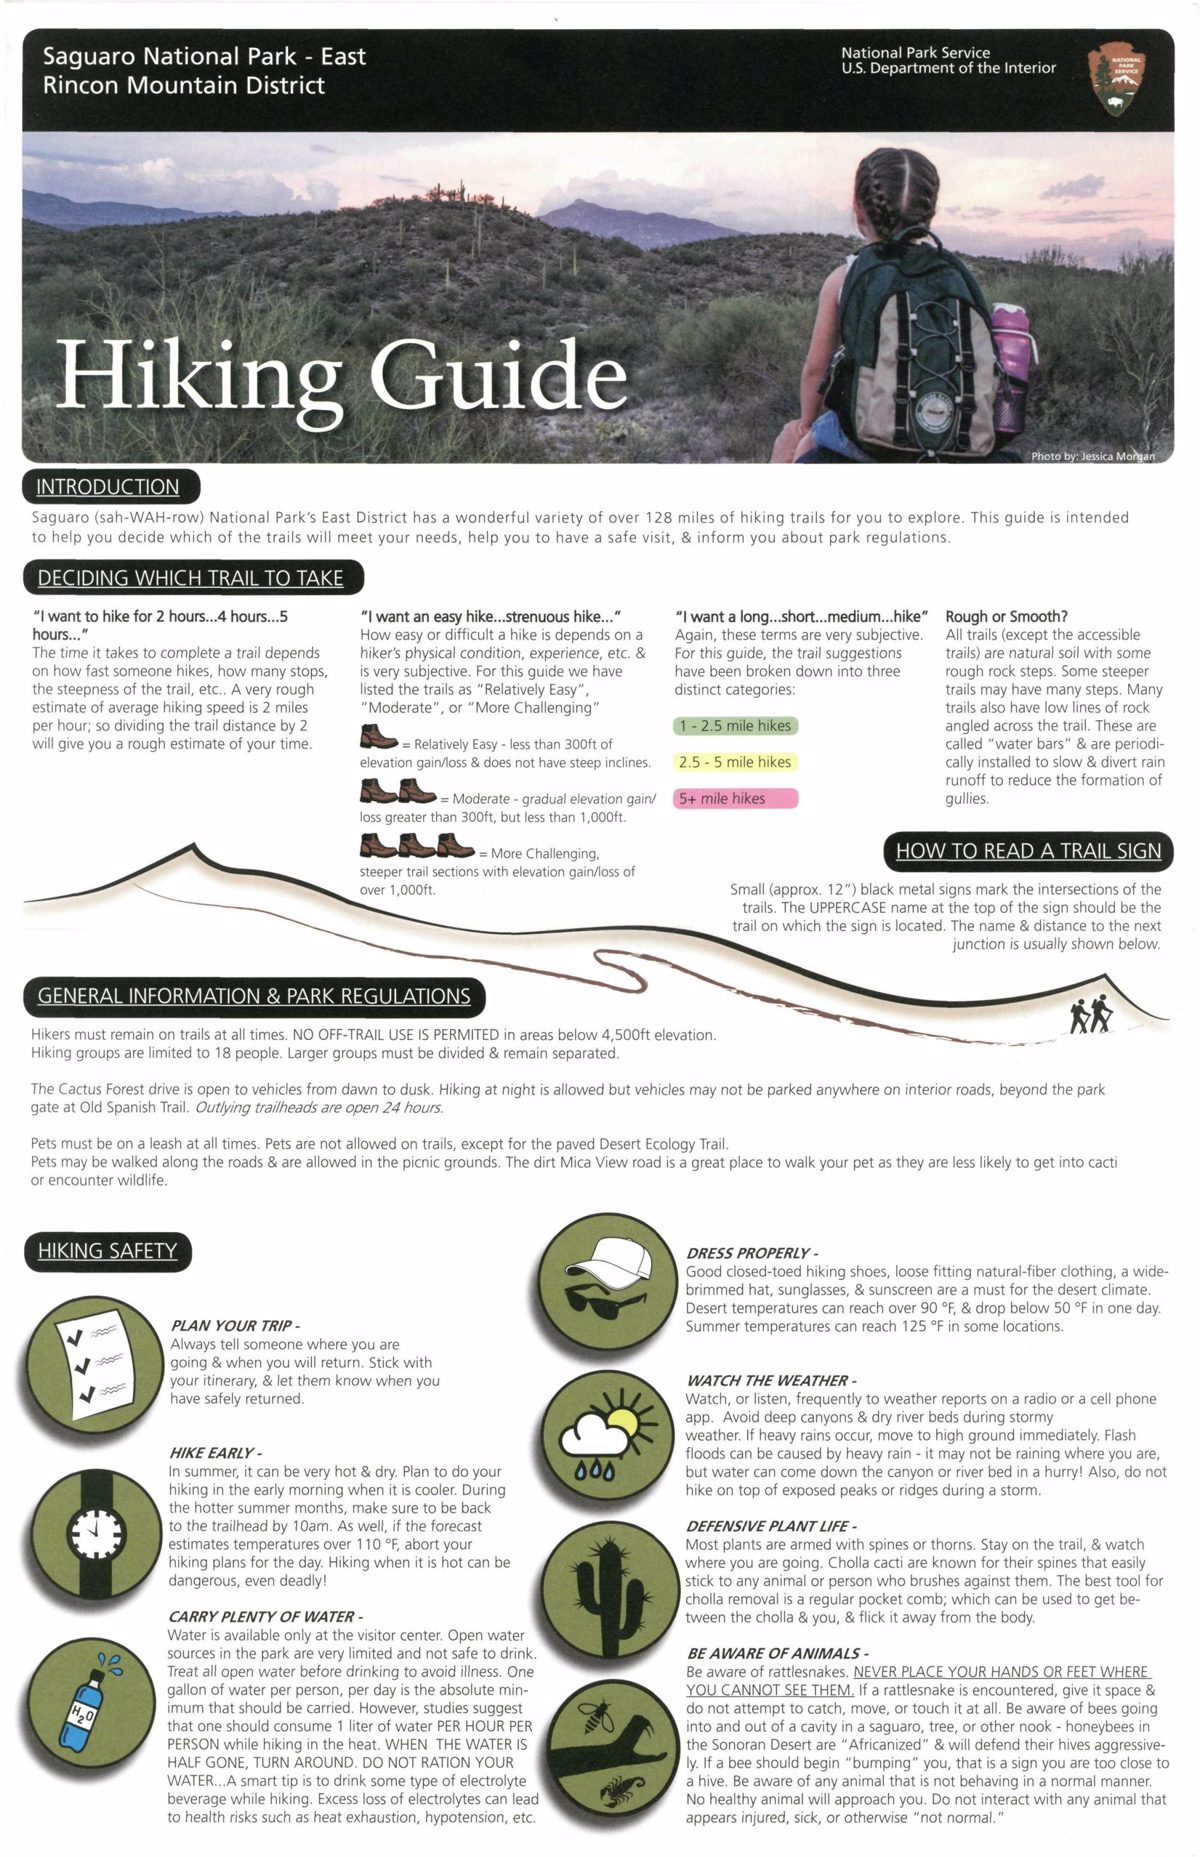 Saguaro National Park - East - Rincon Mountain District - Hiking Guide - 2019 Cover Page